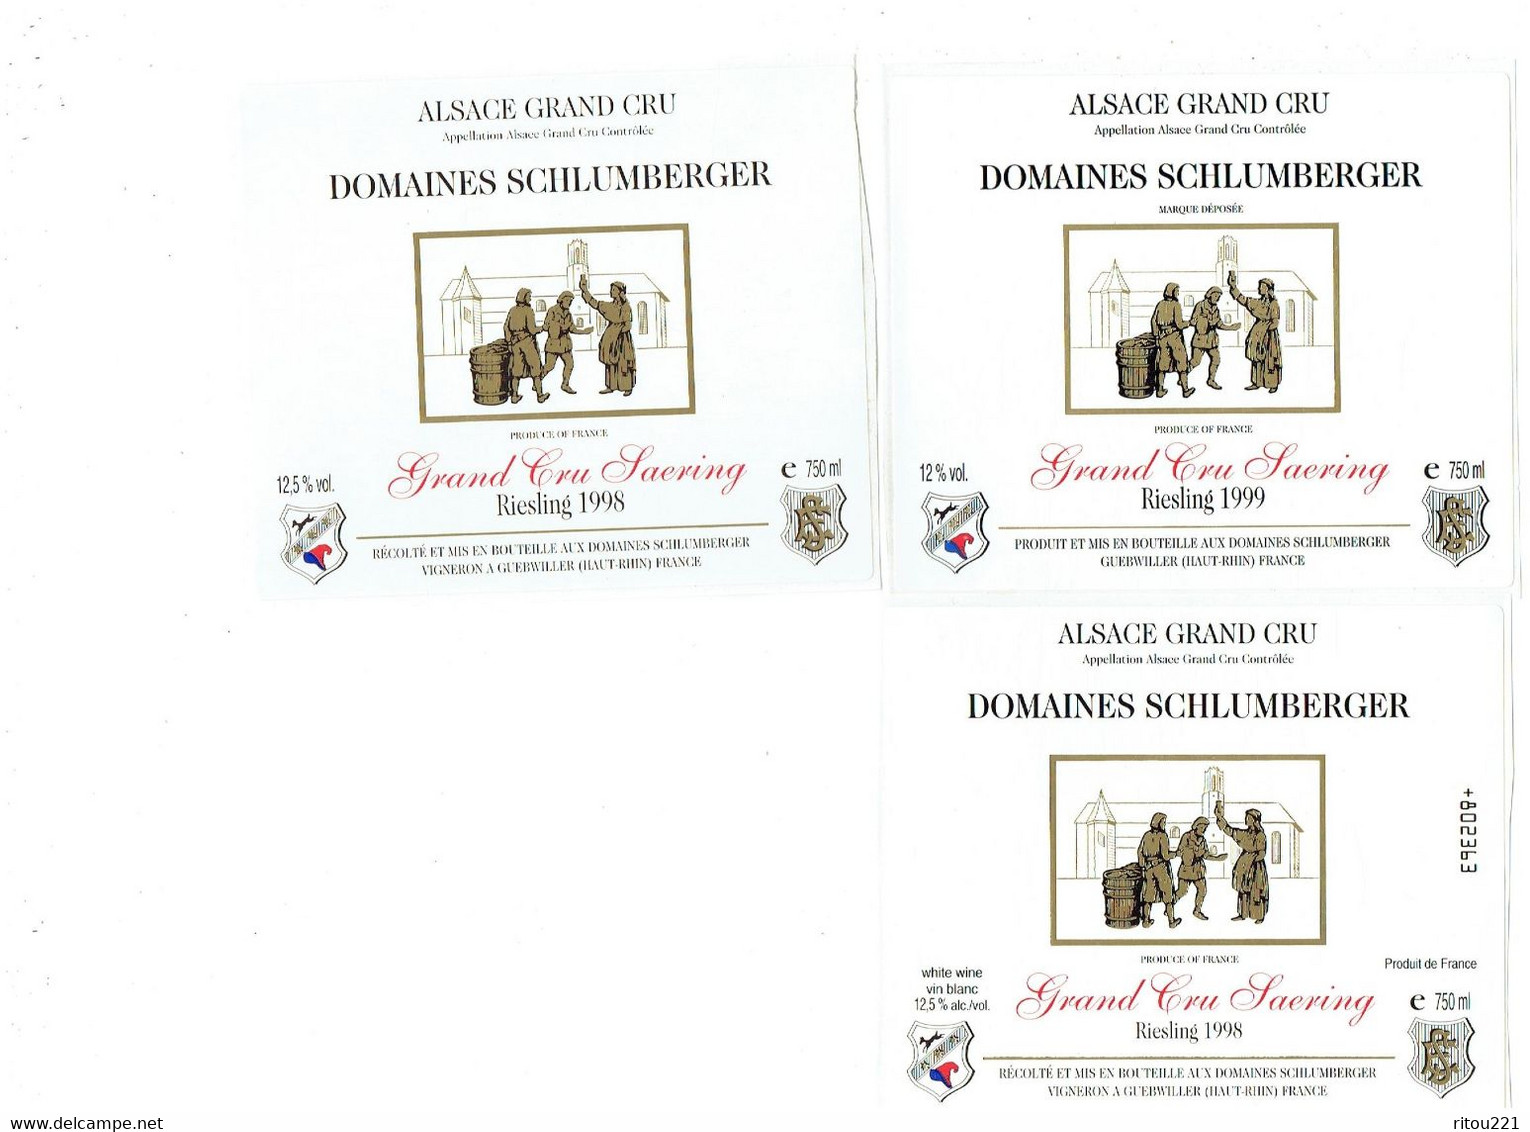 LOT 3 - AUTOCOLLANT Etiquette Vin Alsace DOMAINES SCHLUMBERGER GUEBWILLER Riesling Grand CRU Saering 1998-1999 - Riesling